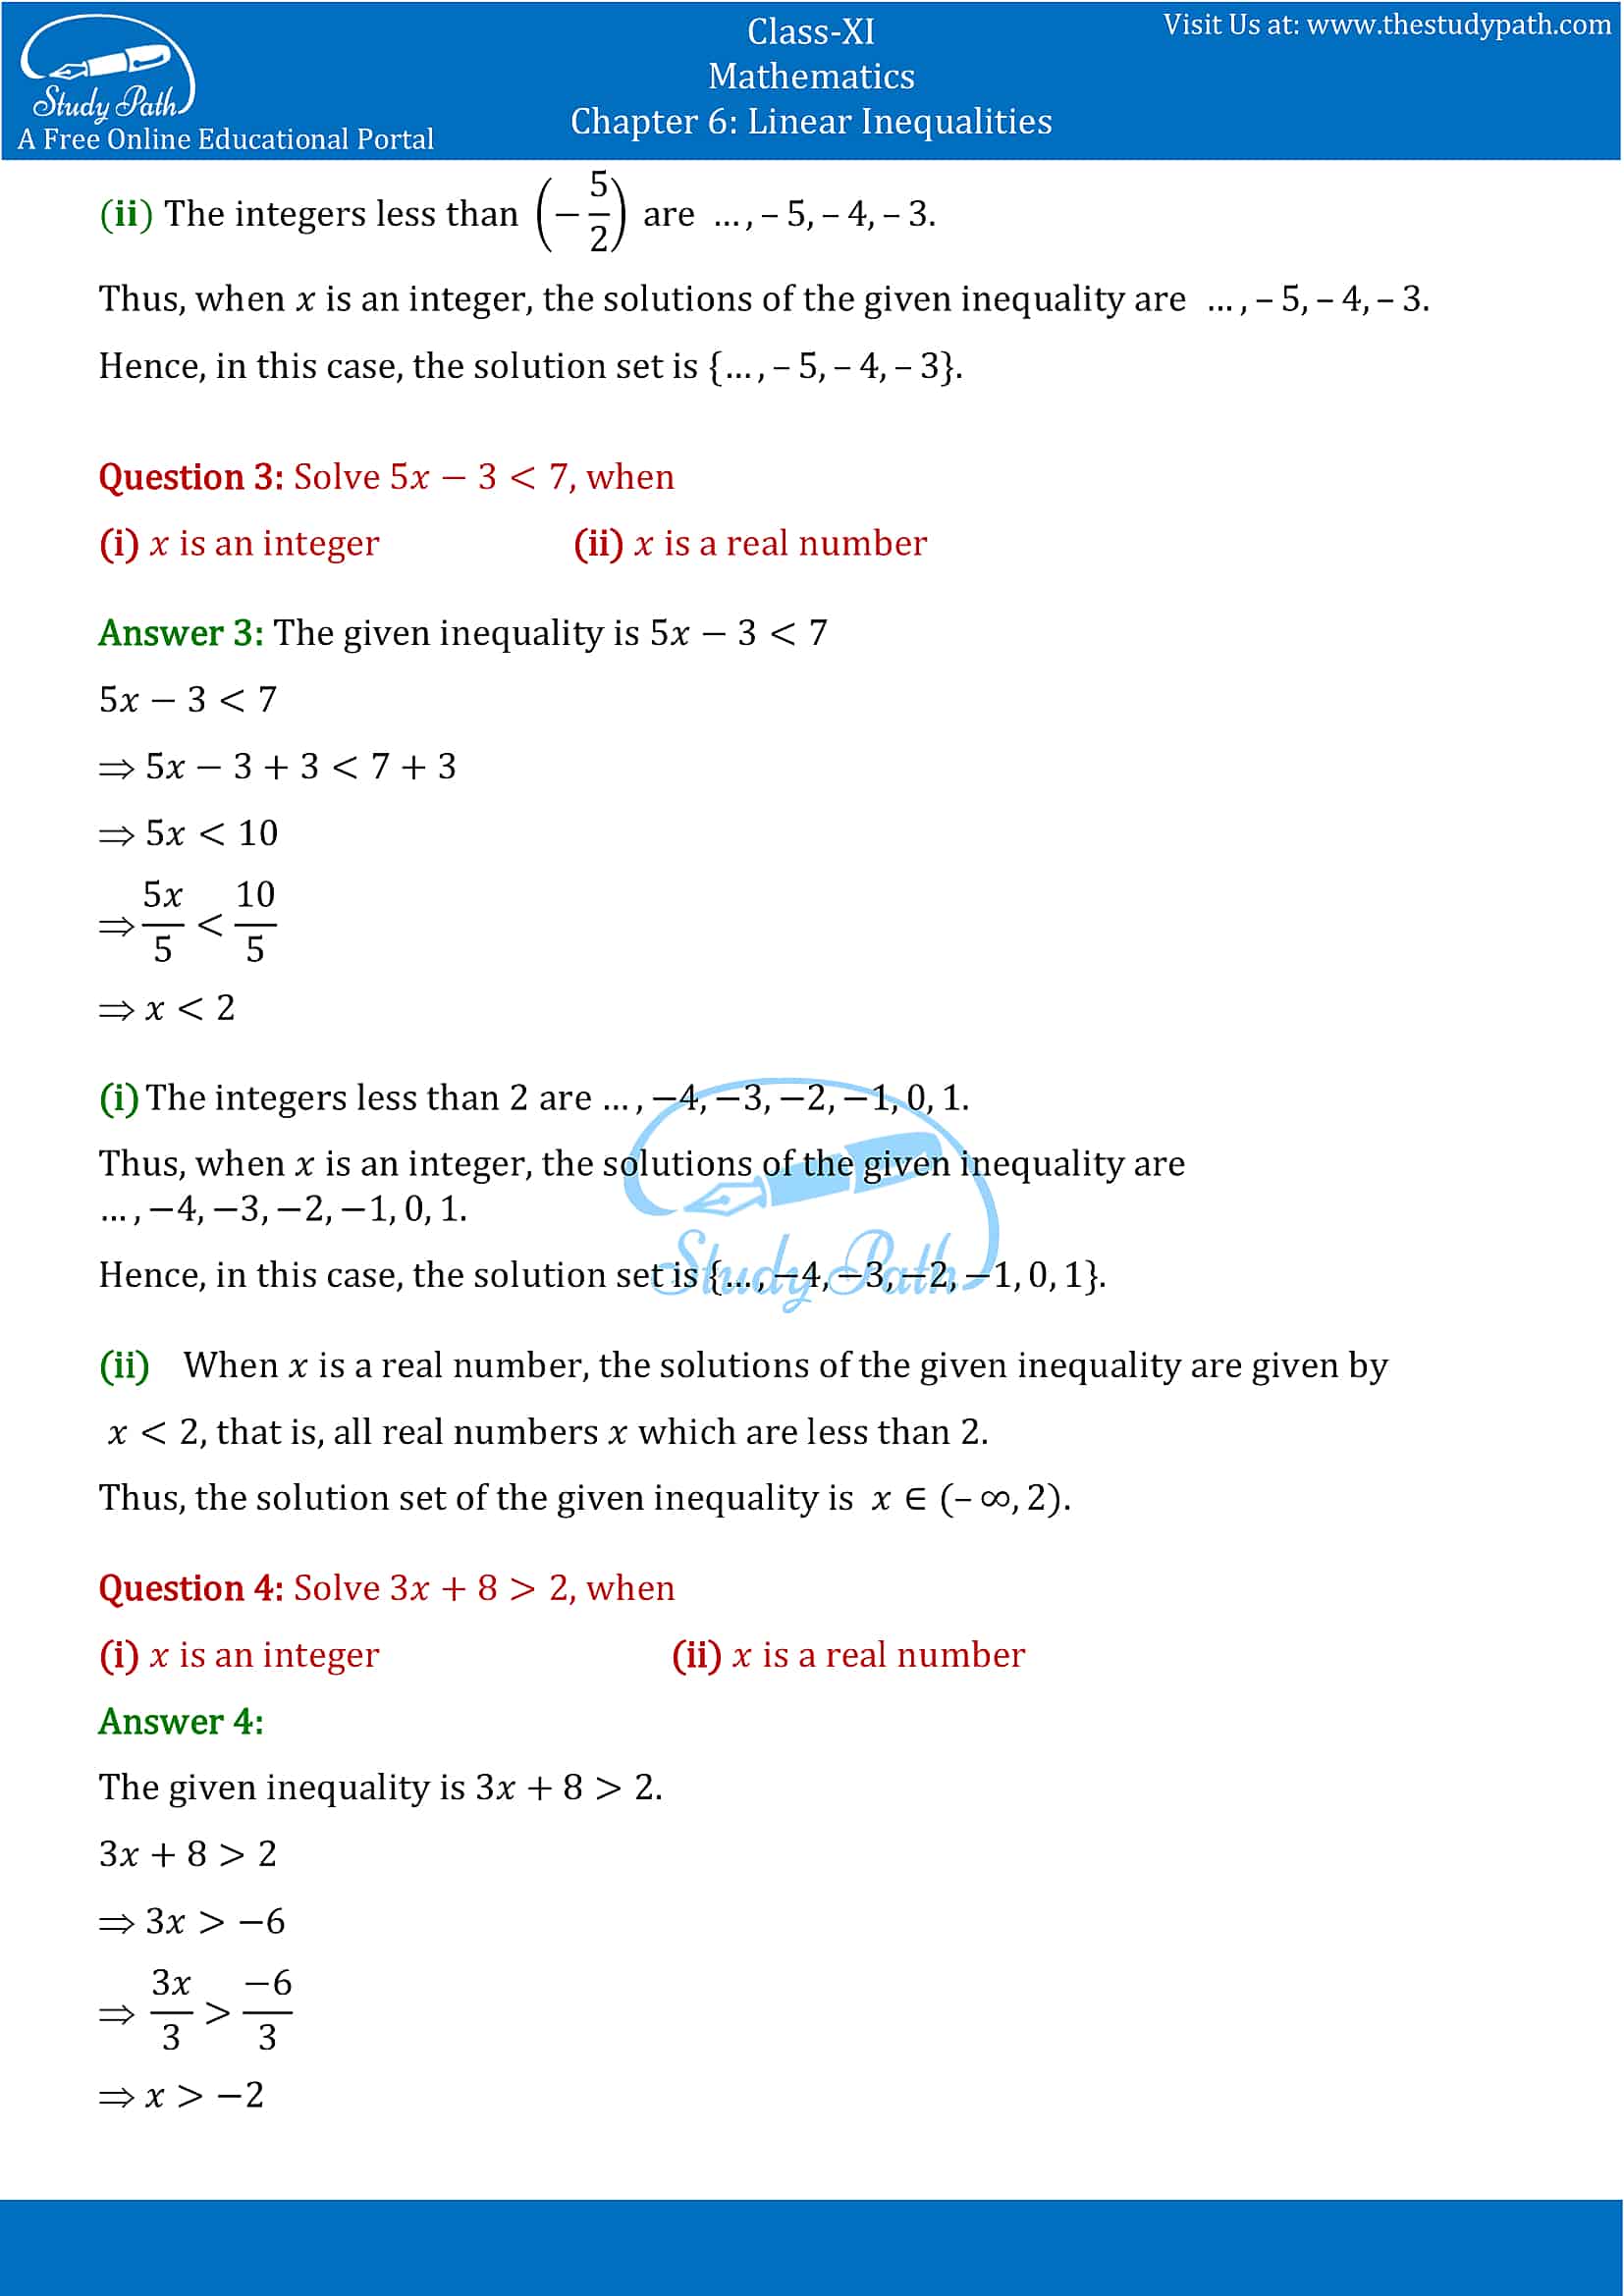 NCERT Solutions for Class 11 Maths chapter 6 Linear Inequalities Part-2